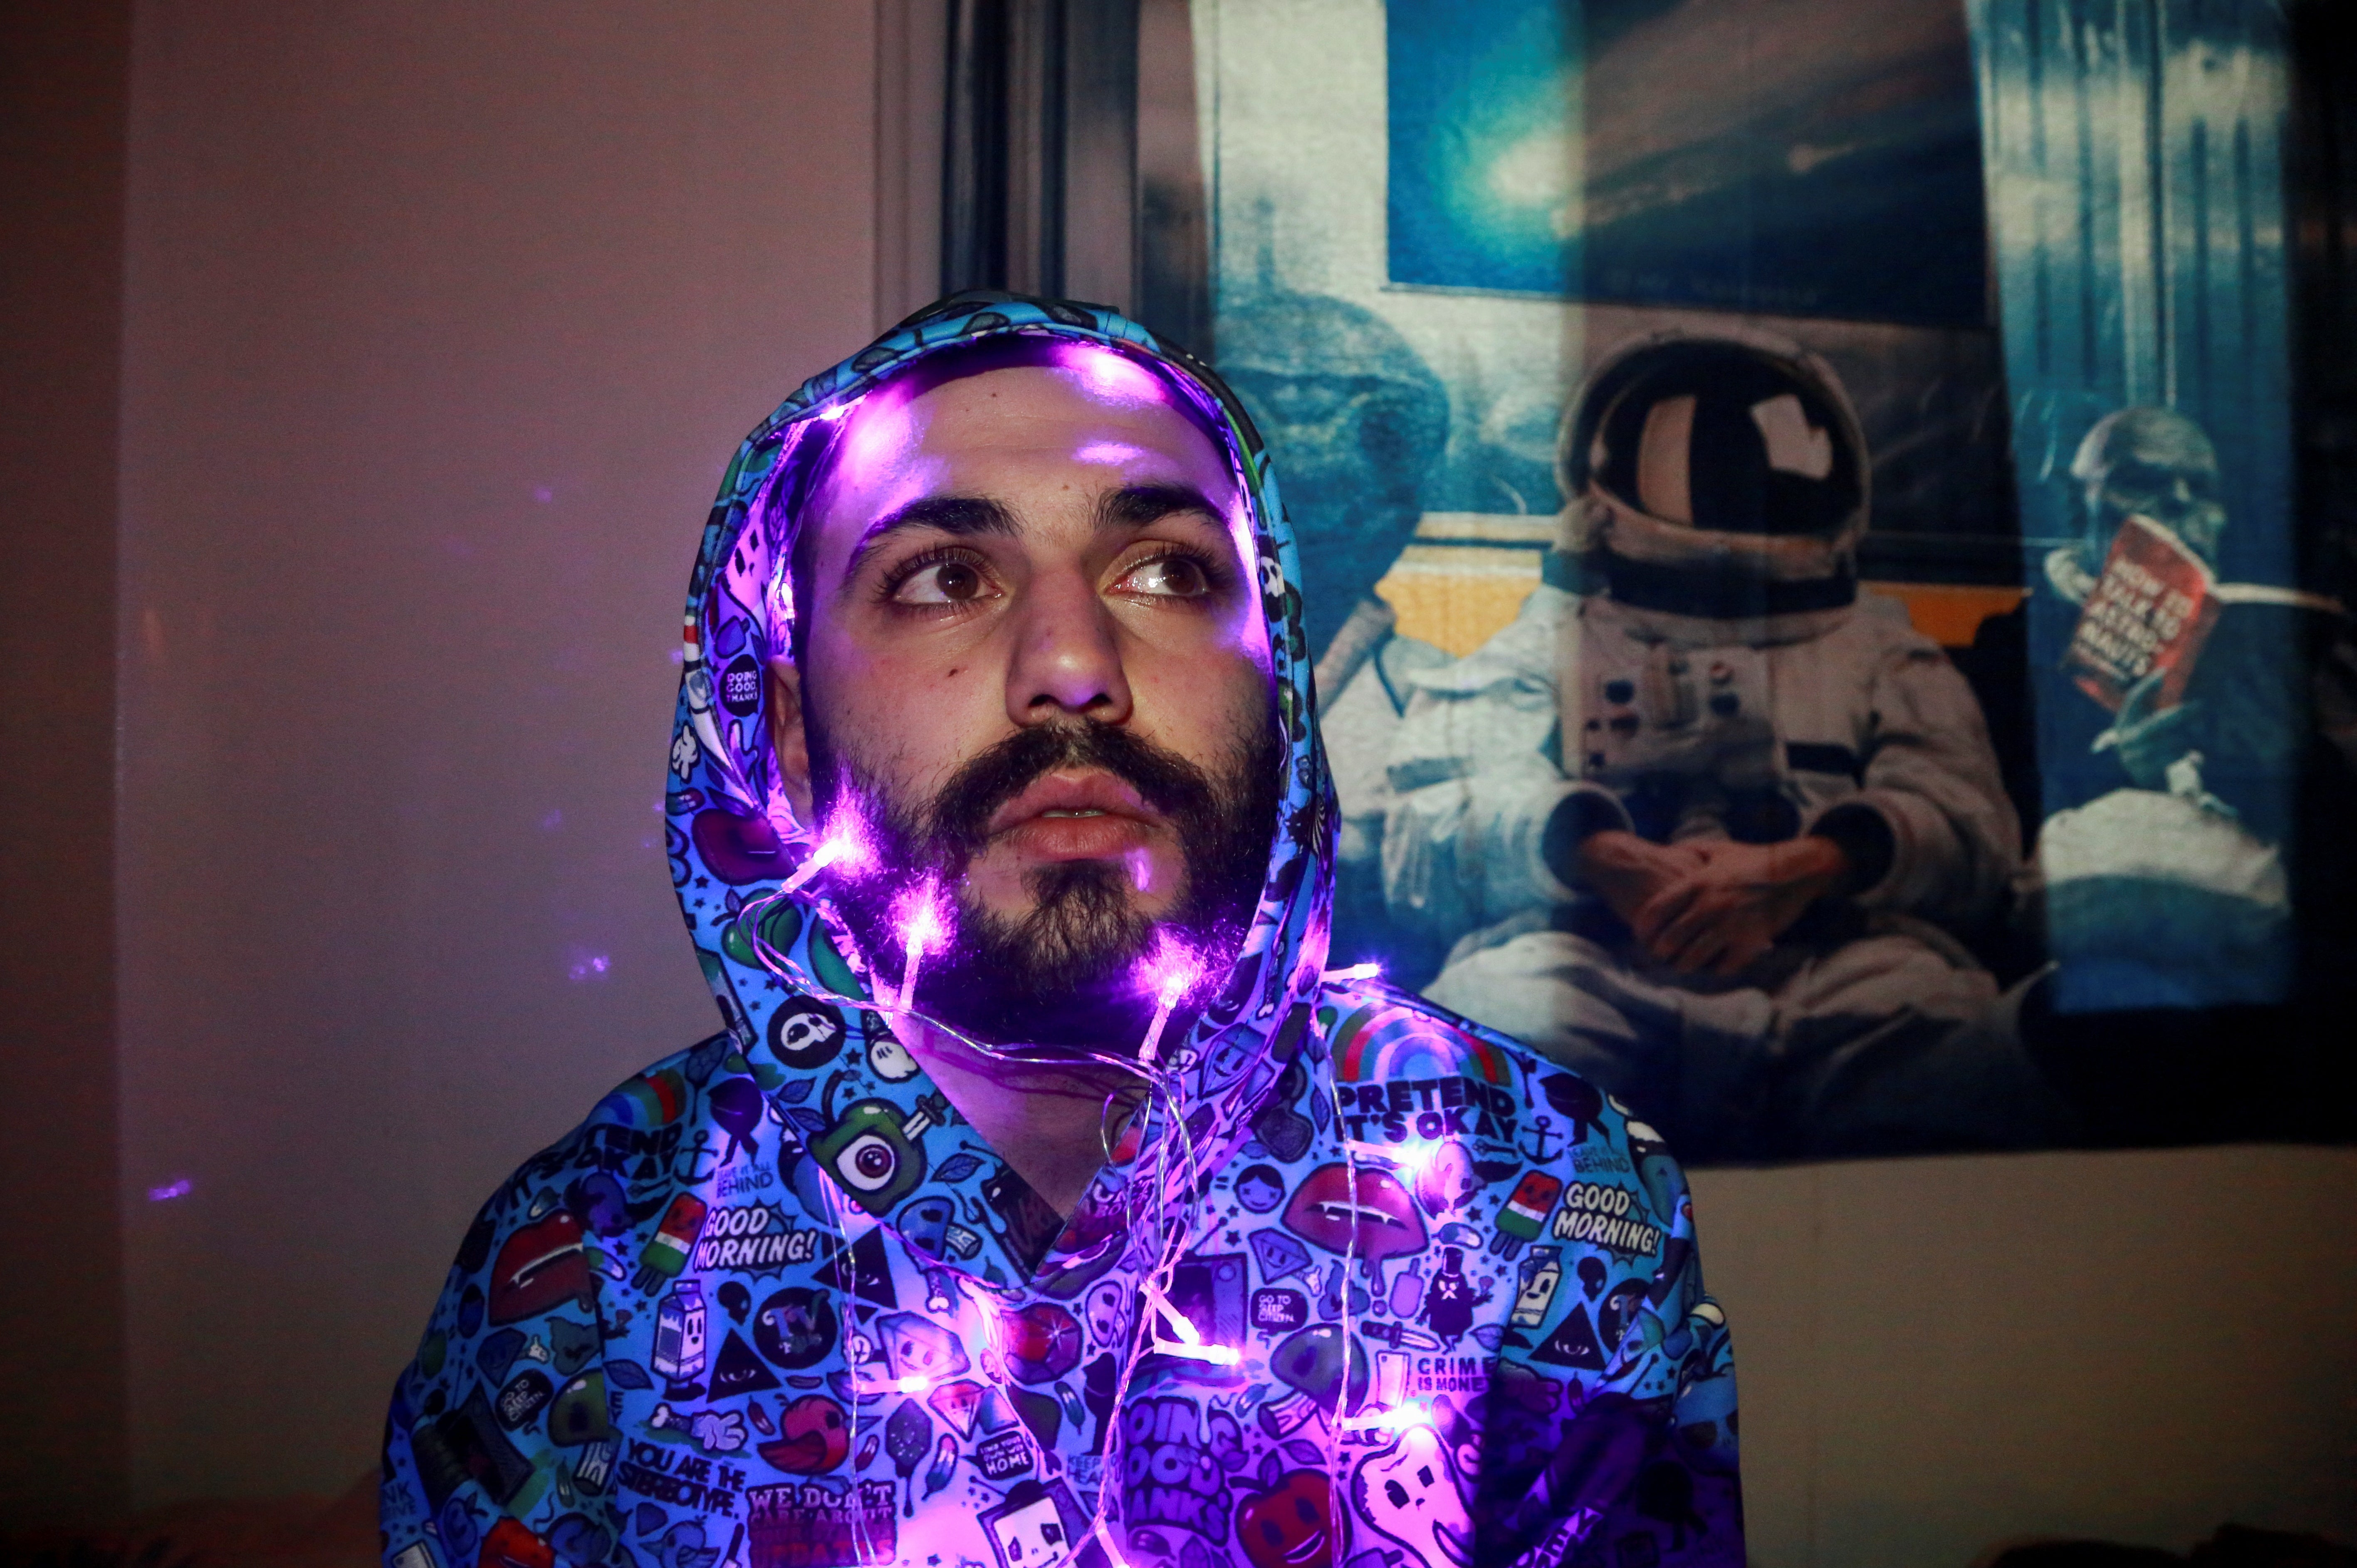 Ali, an IT student, poses for a photograph with lights wrapped around his head, in Damascus